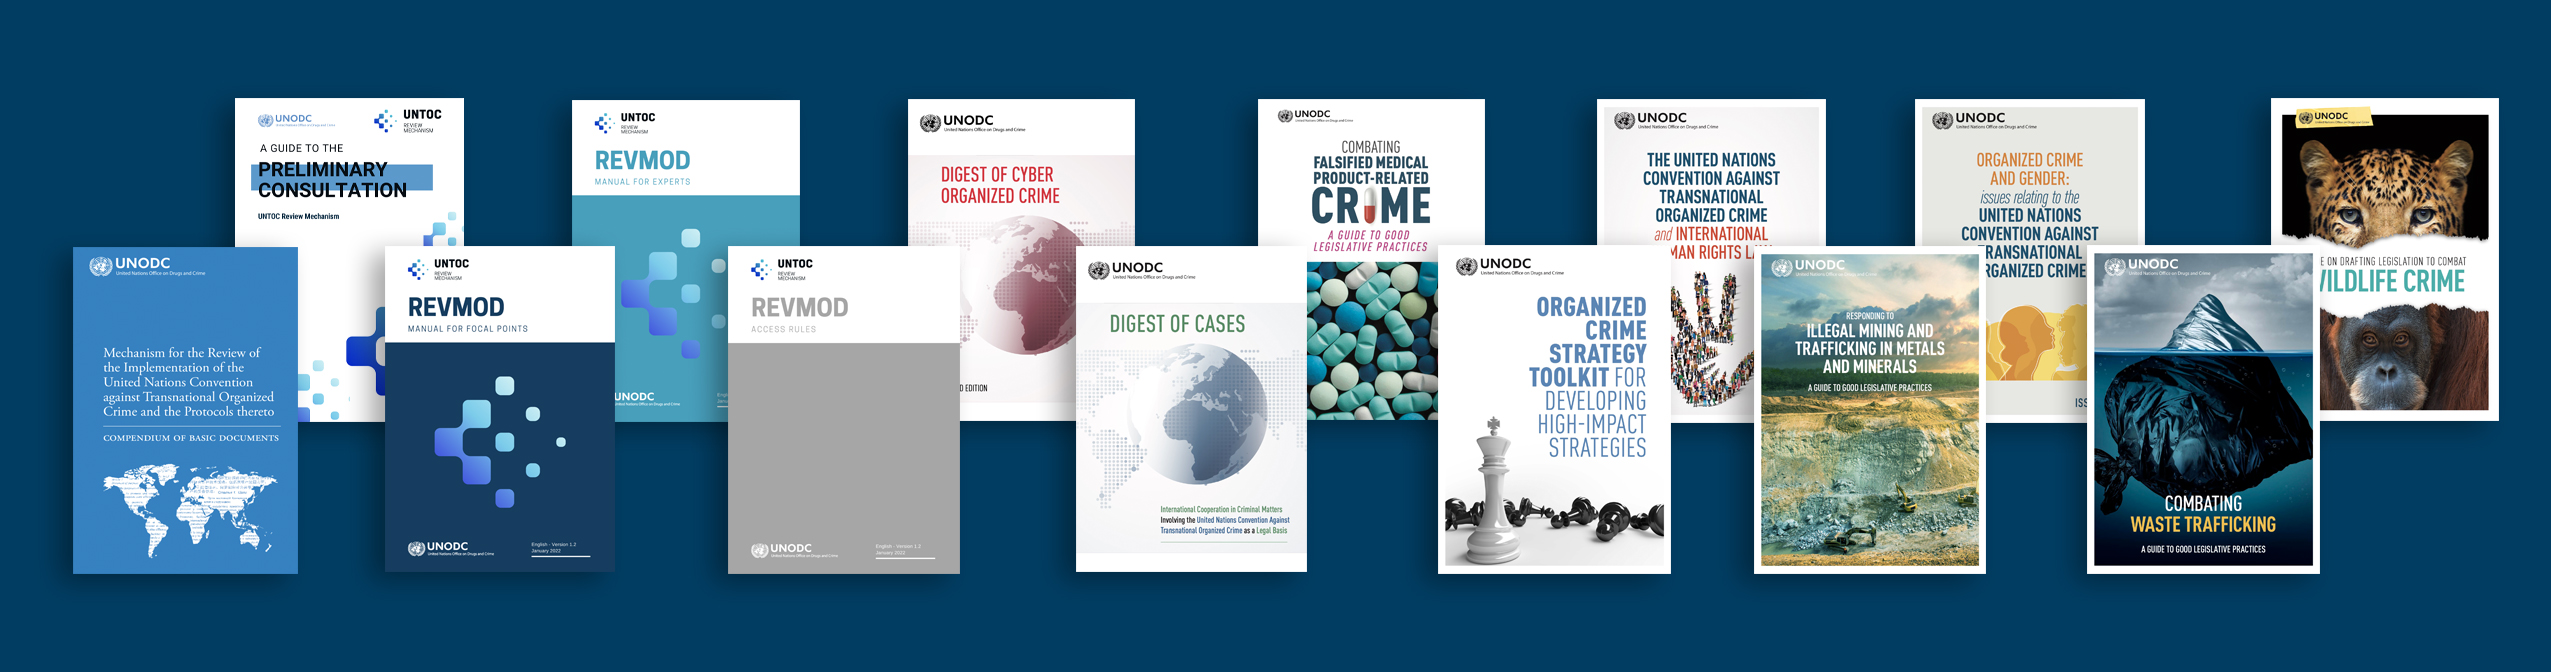 A visual with the cover pages of UNODC publications relating to the work on Organized Crime.